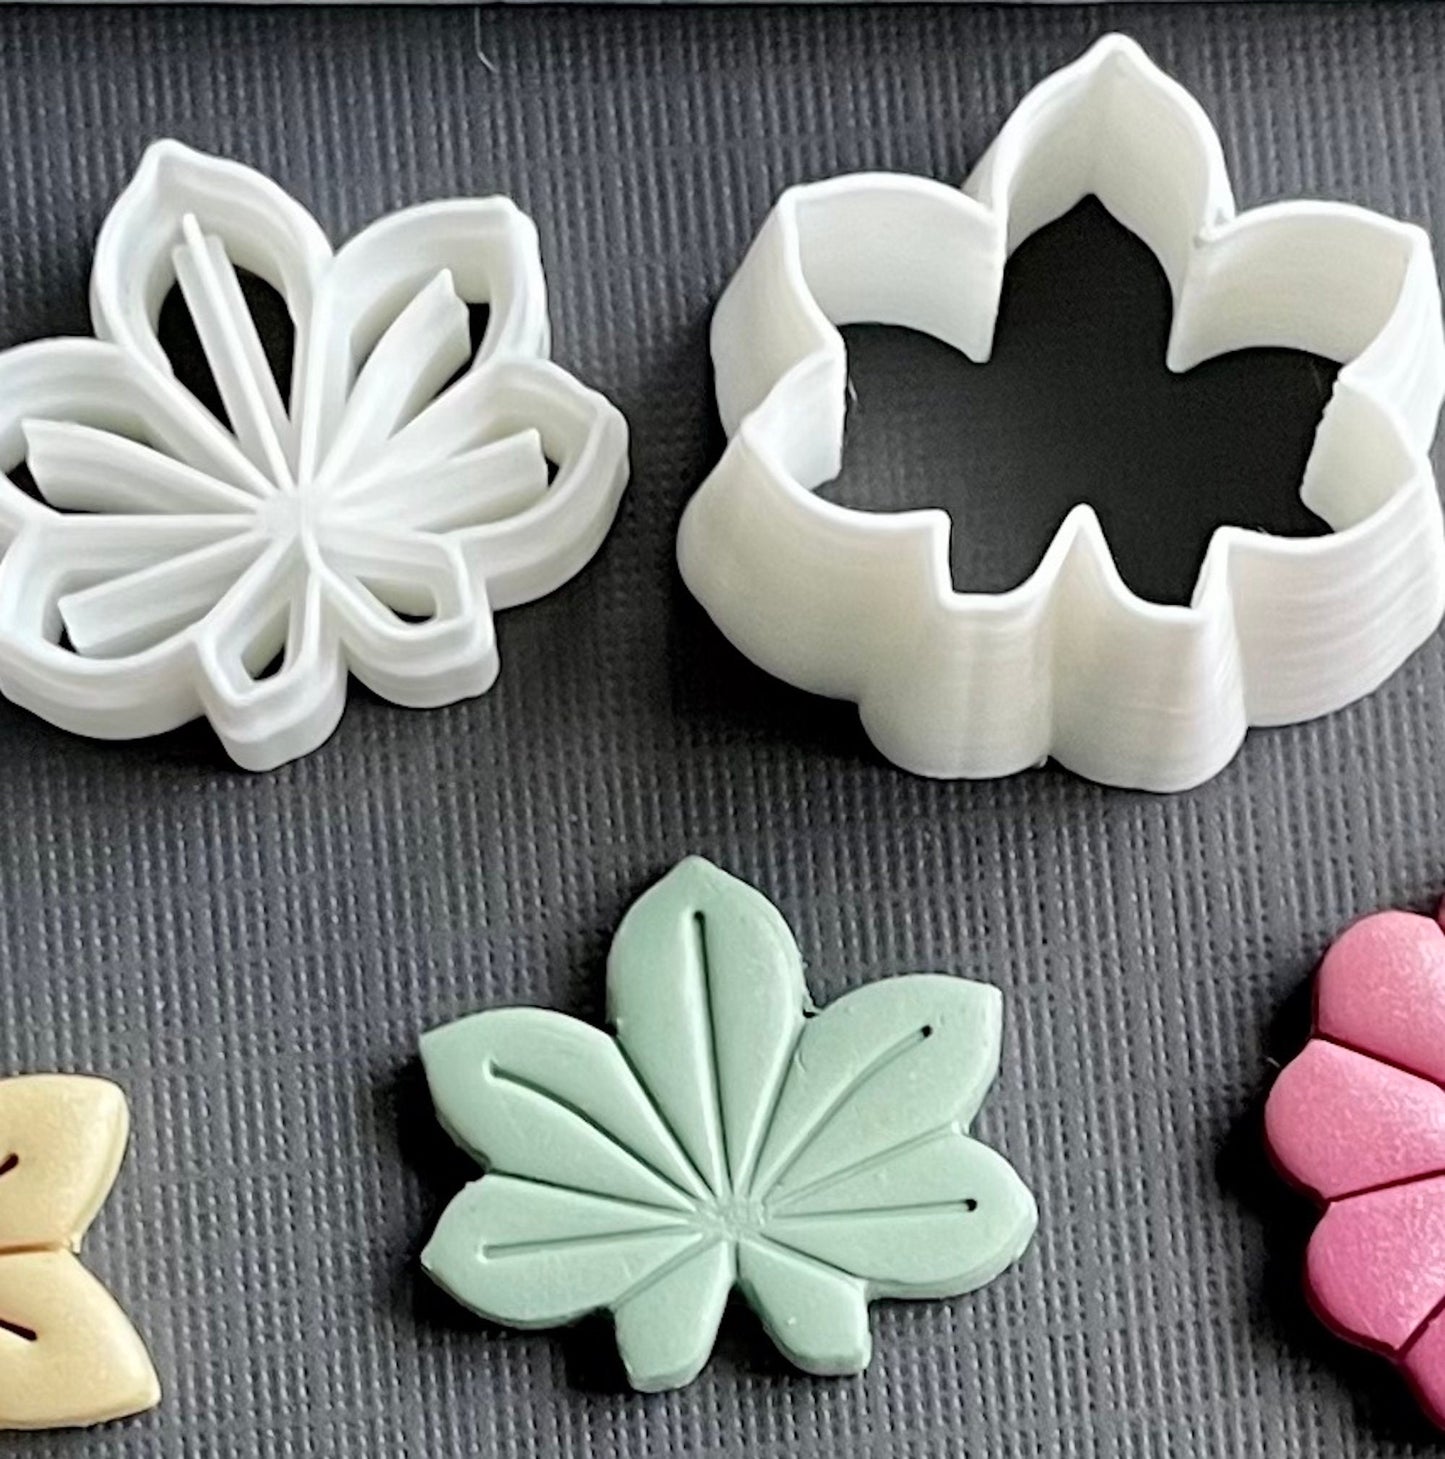 One inch flowers (Set 3) stamps and cutters - made for use with polymer clay